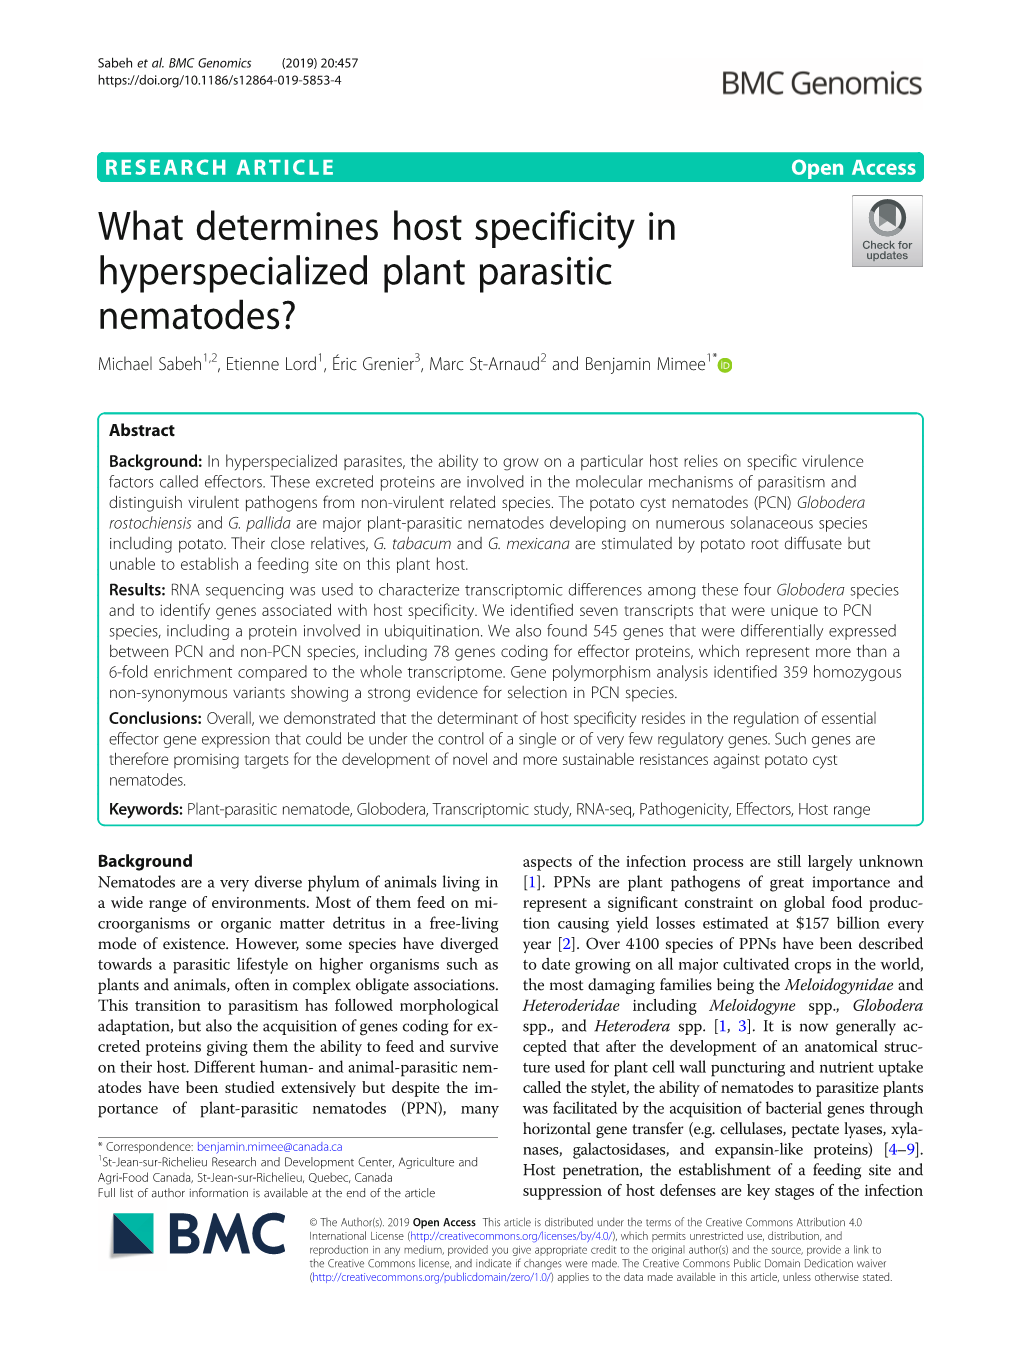 What Determines Host Specificity in Hyperspecialized Plant Parasitic Nematodes? Michael Sabeh1,2, Etienne Lord1, Éric Grenier3, Marc St-Arnaud2 and Benjamin Mimee1*